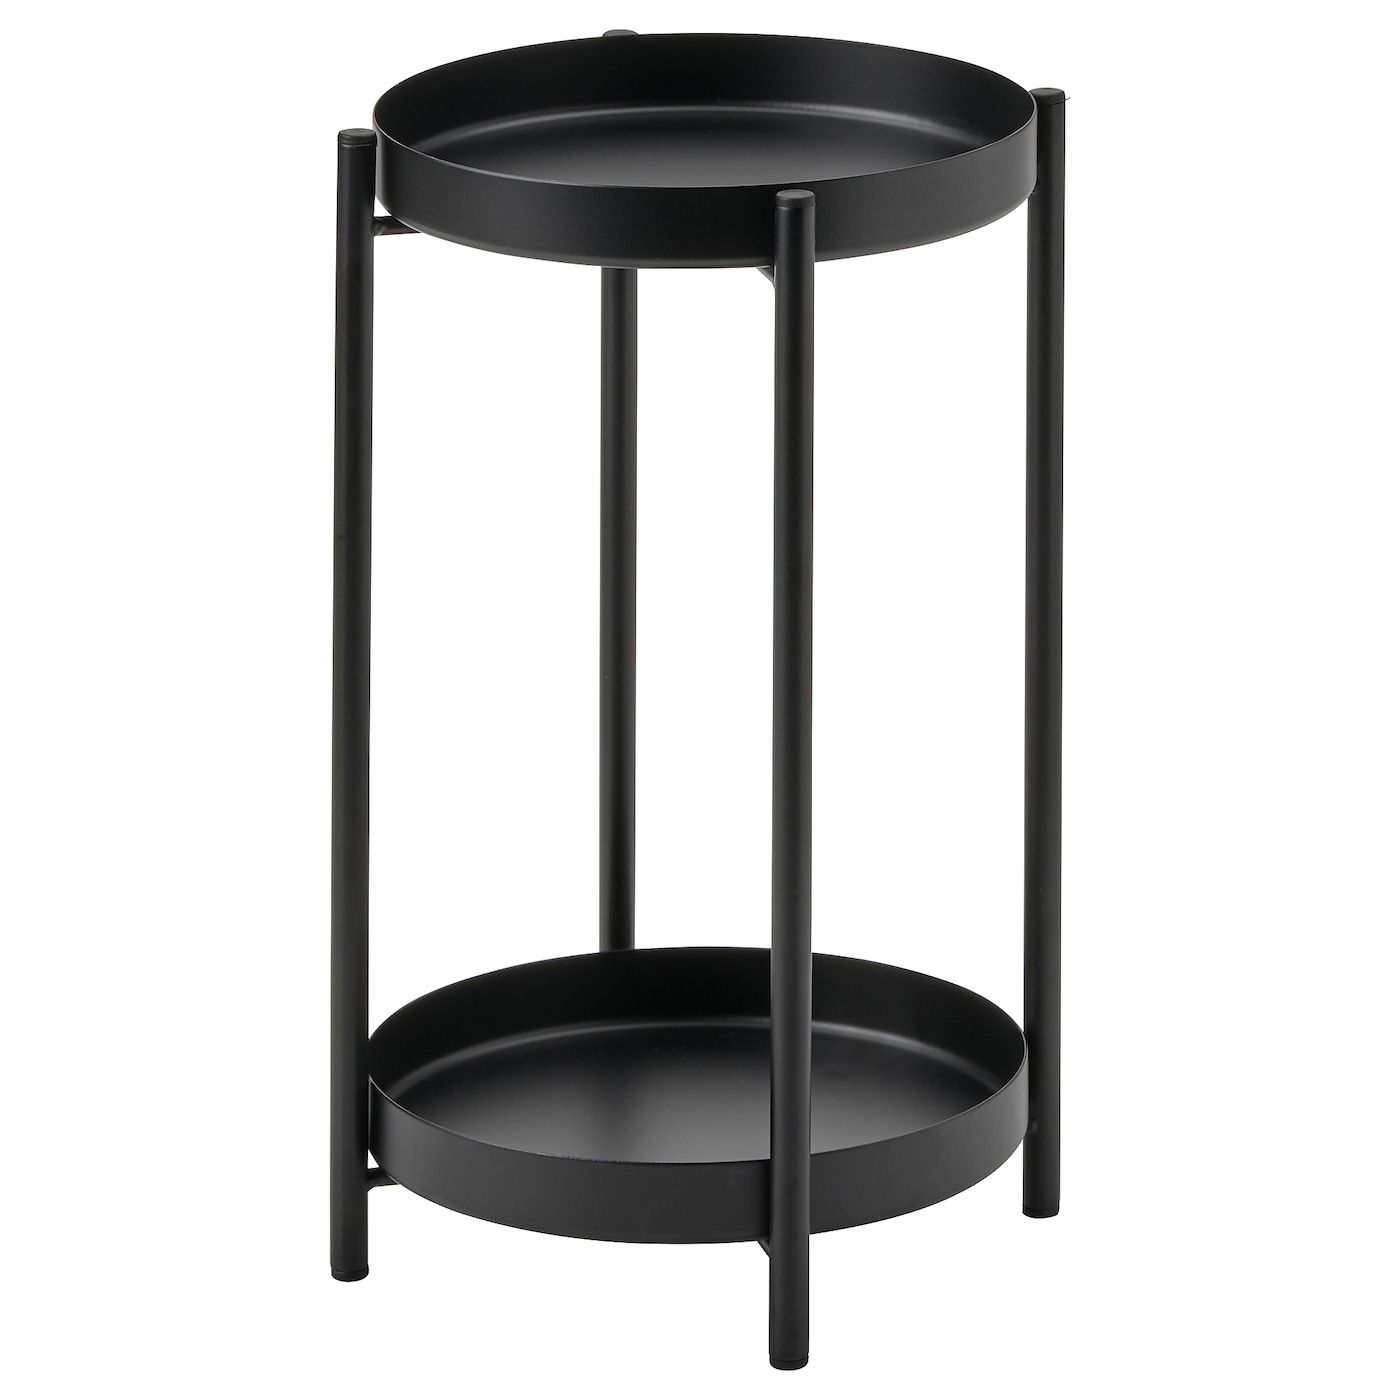 Olivblad Plant Stand, Indoor/outdoor Black, 13 ¾" – Ikea With Black Plant Stands (View 3 of 15)